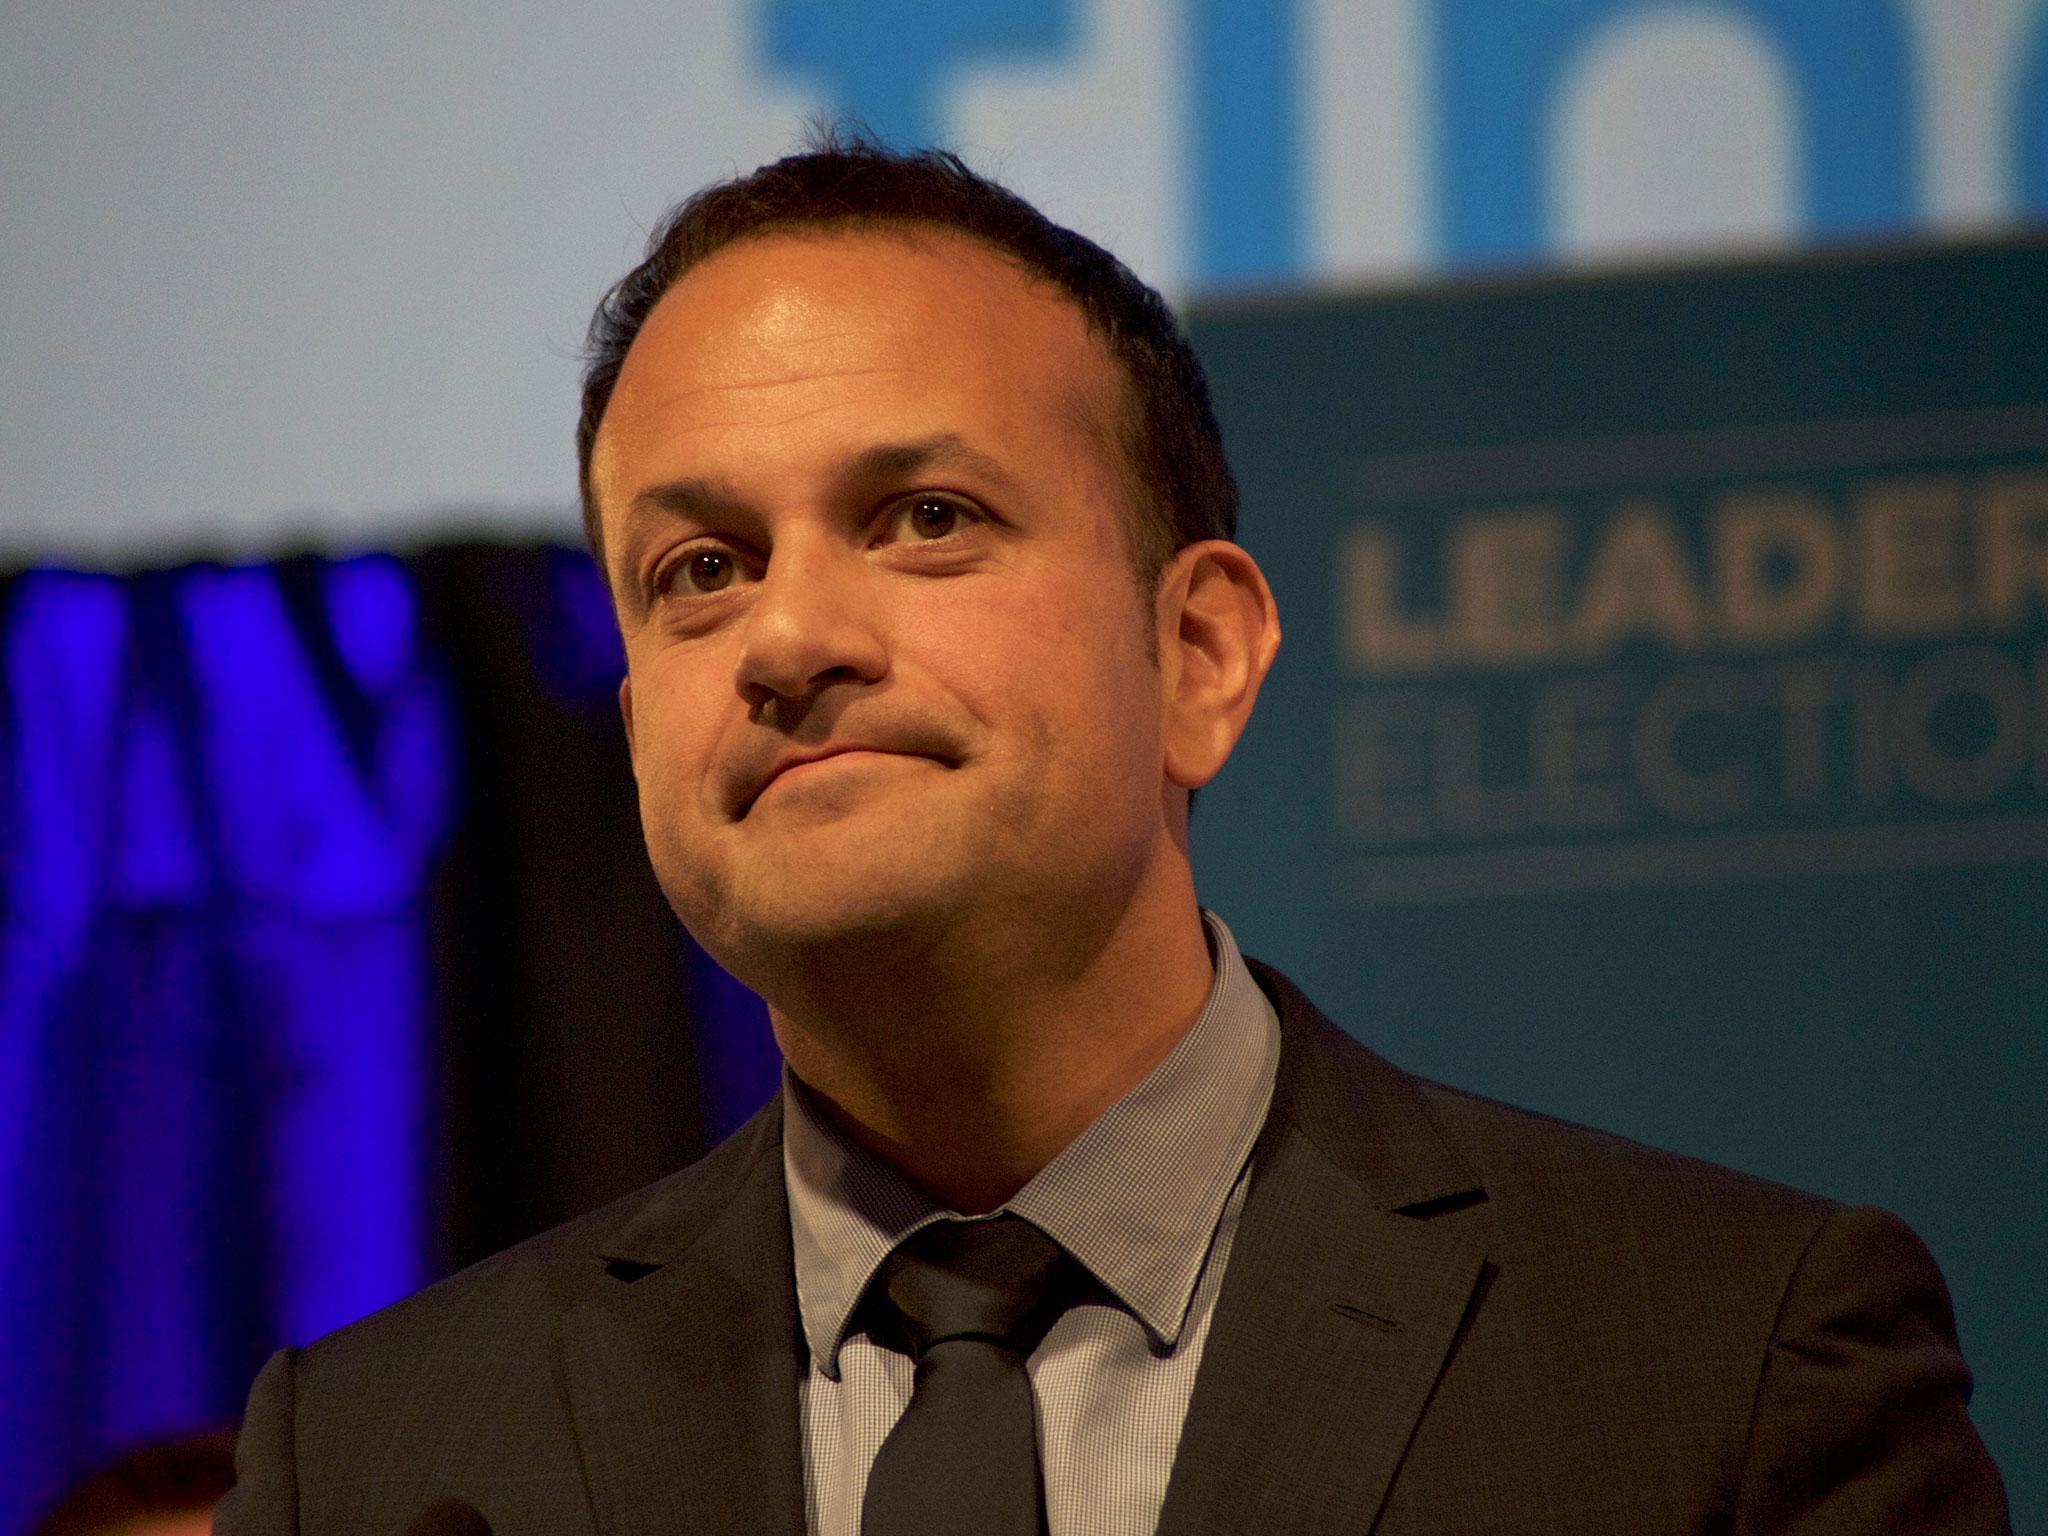 Leo Varadkar said more 'clarity' was needed over the UK's position